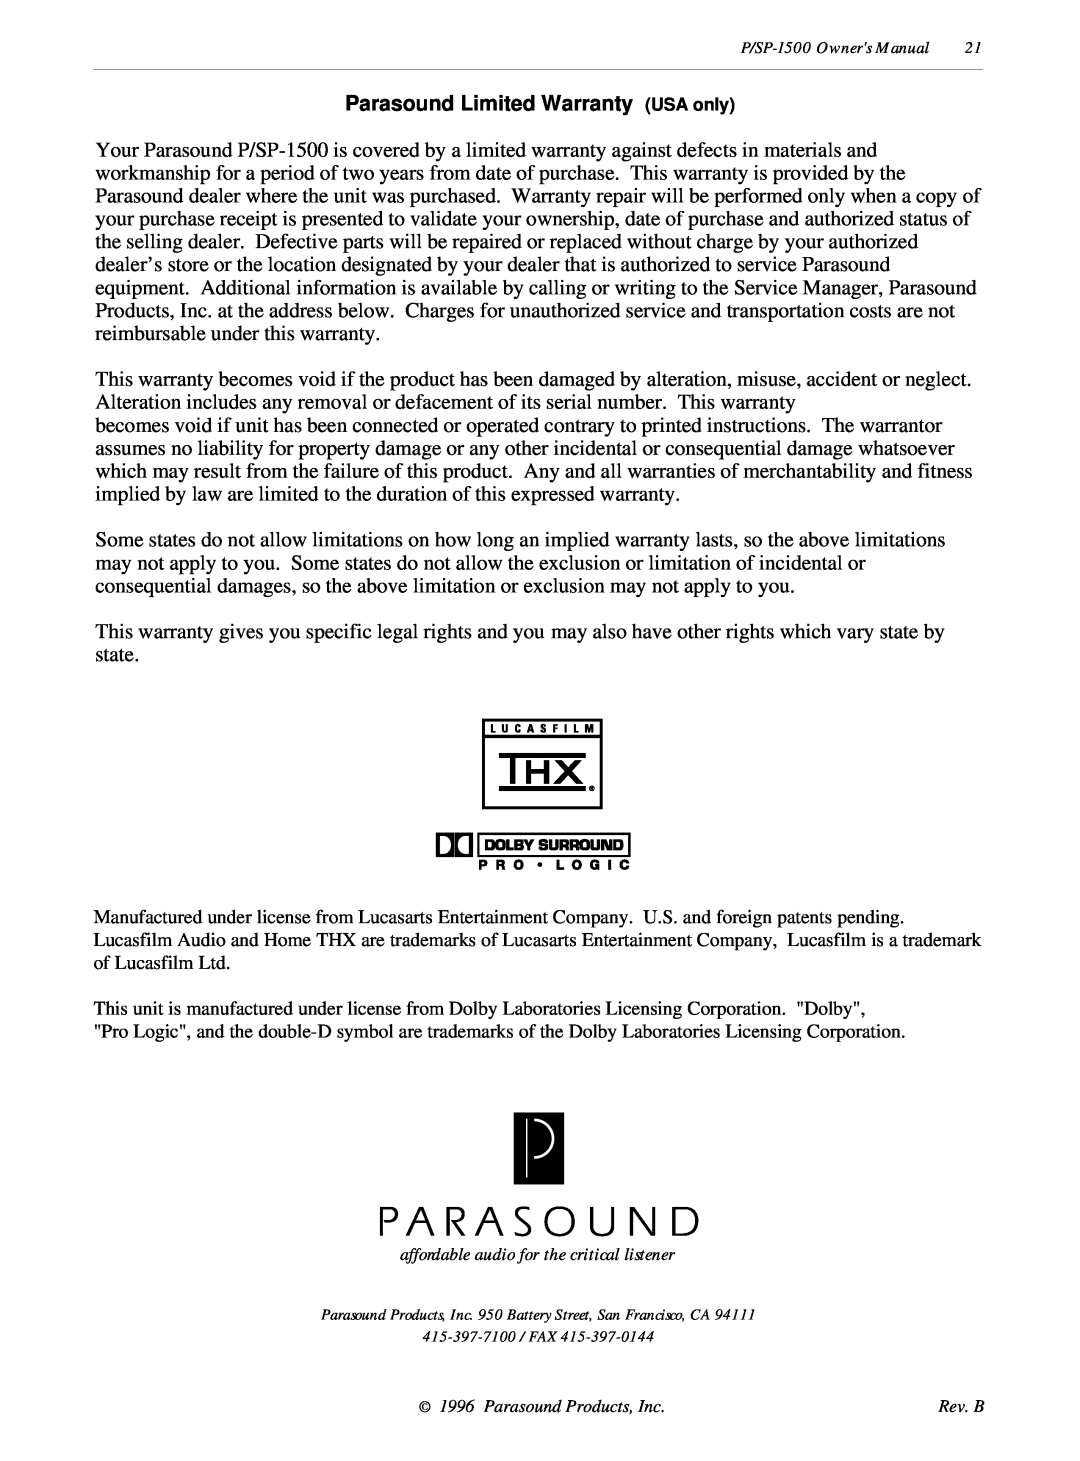 Parasound P/SP-1500 owner manual Parasound Limited Warranty USA only, affordable audio for the critical listener 